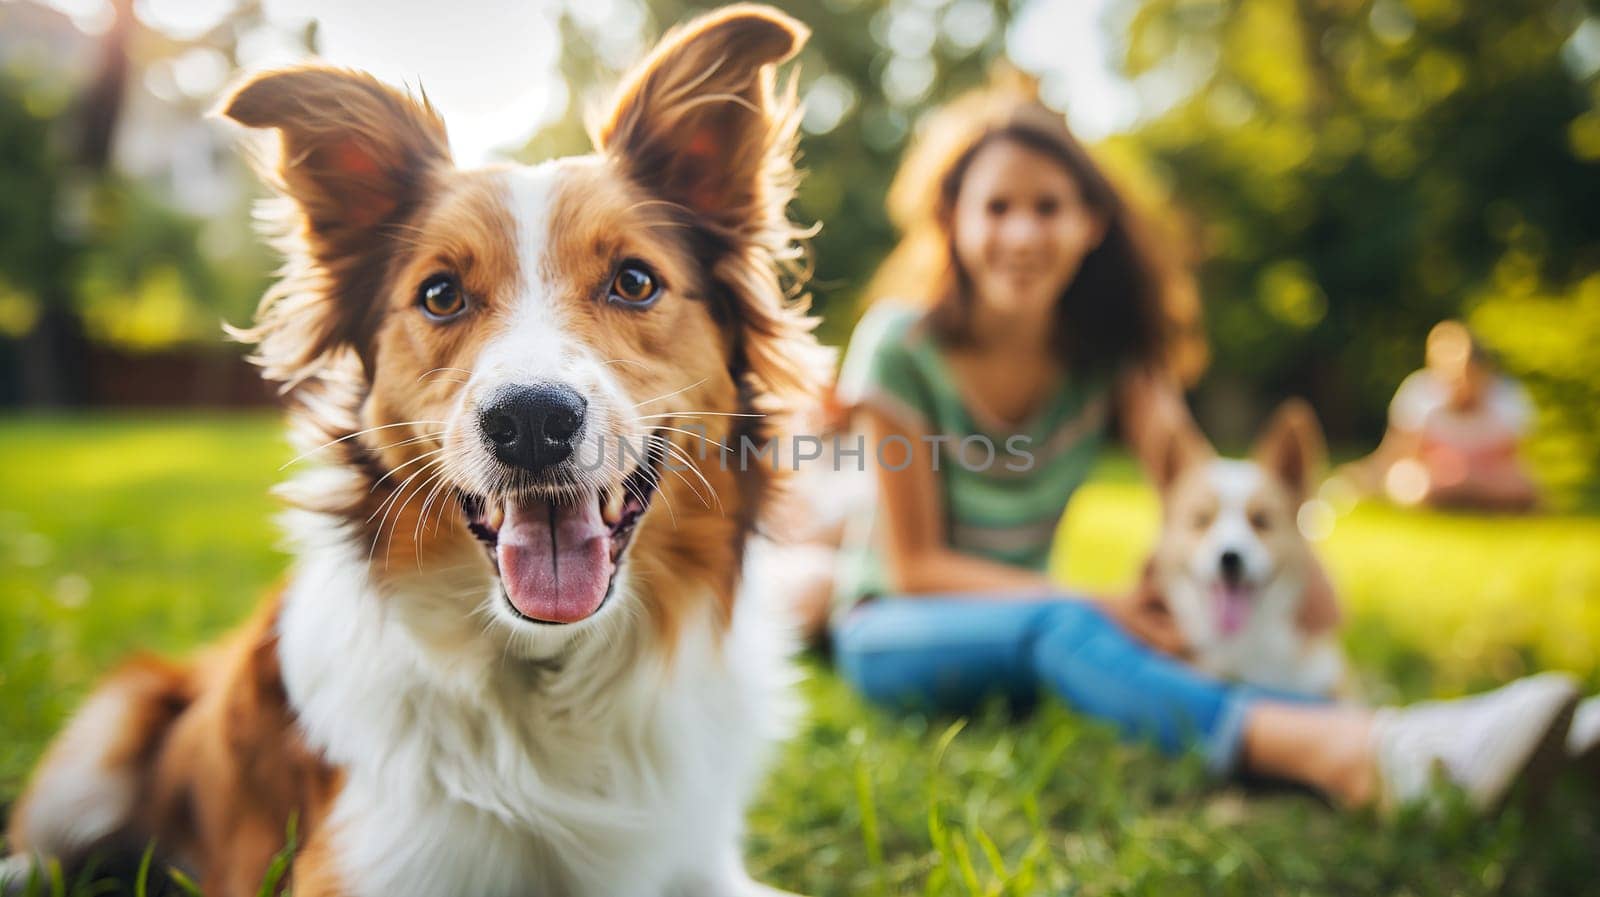 Smiling Border Collie Playing in a Sunlit Park With Owners by chrisroll